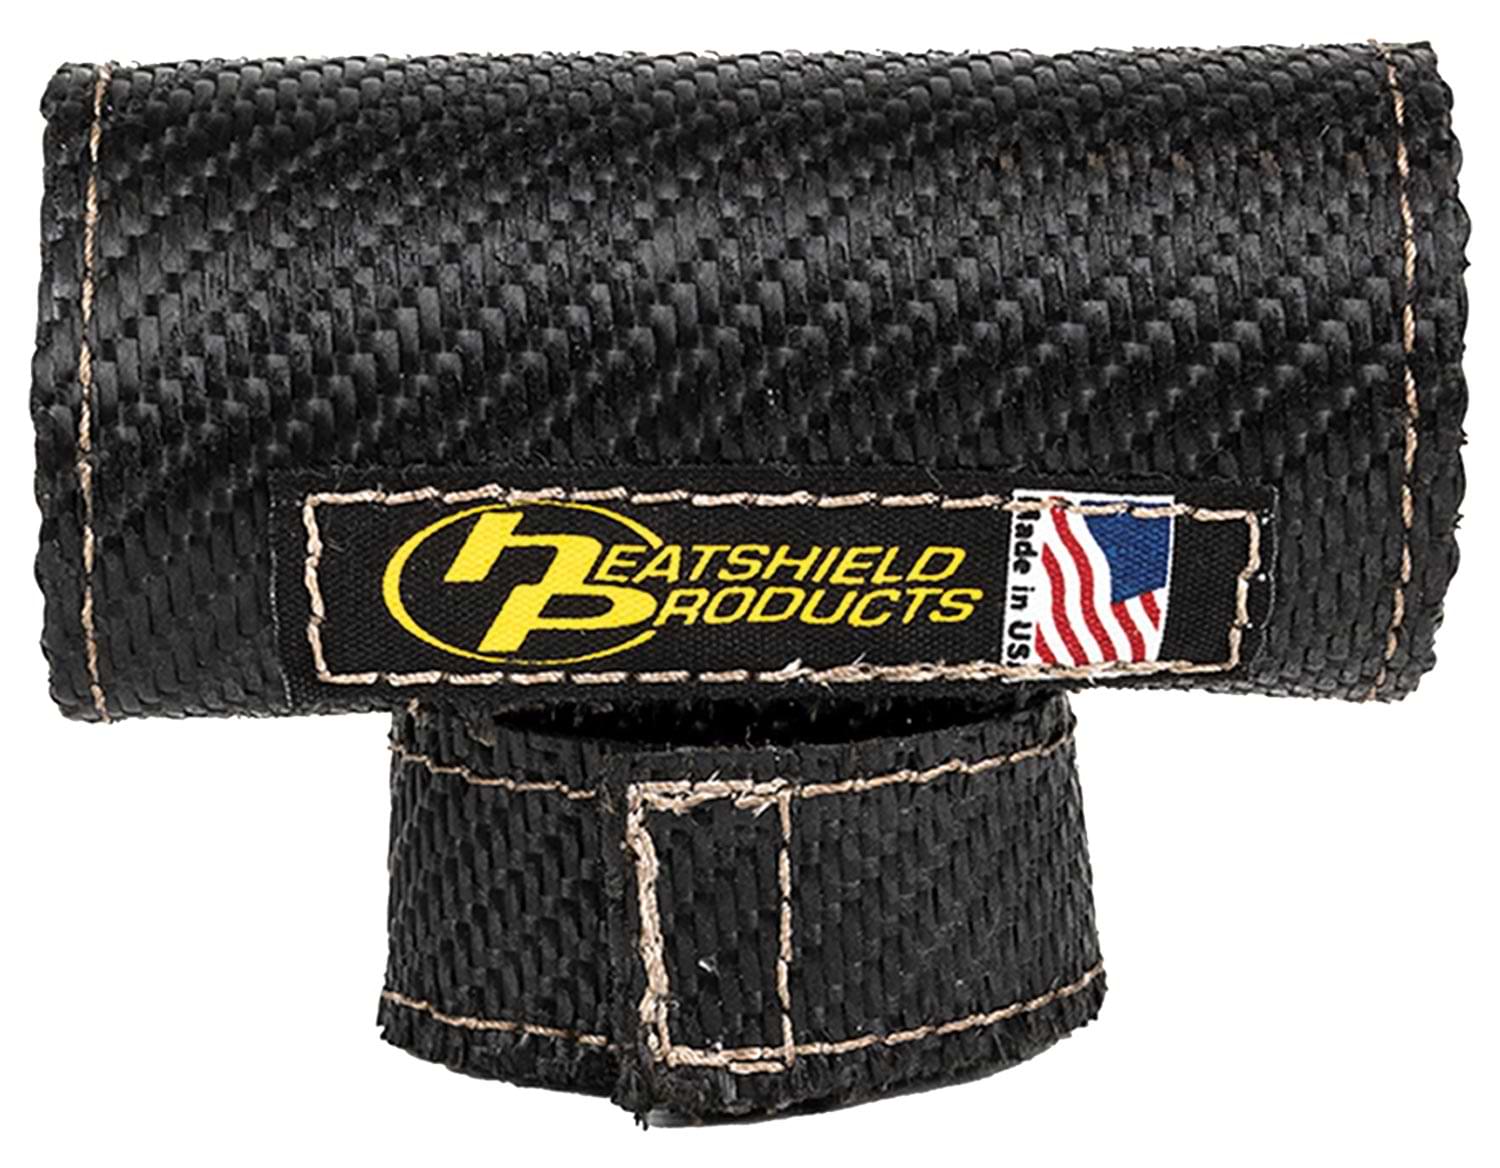 close up view of Heatshield Products’ new Utili-Shield Sleeve